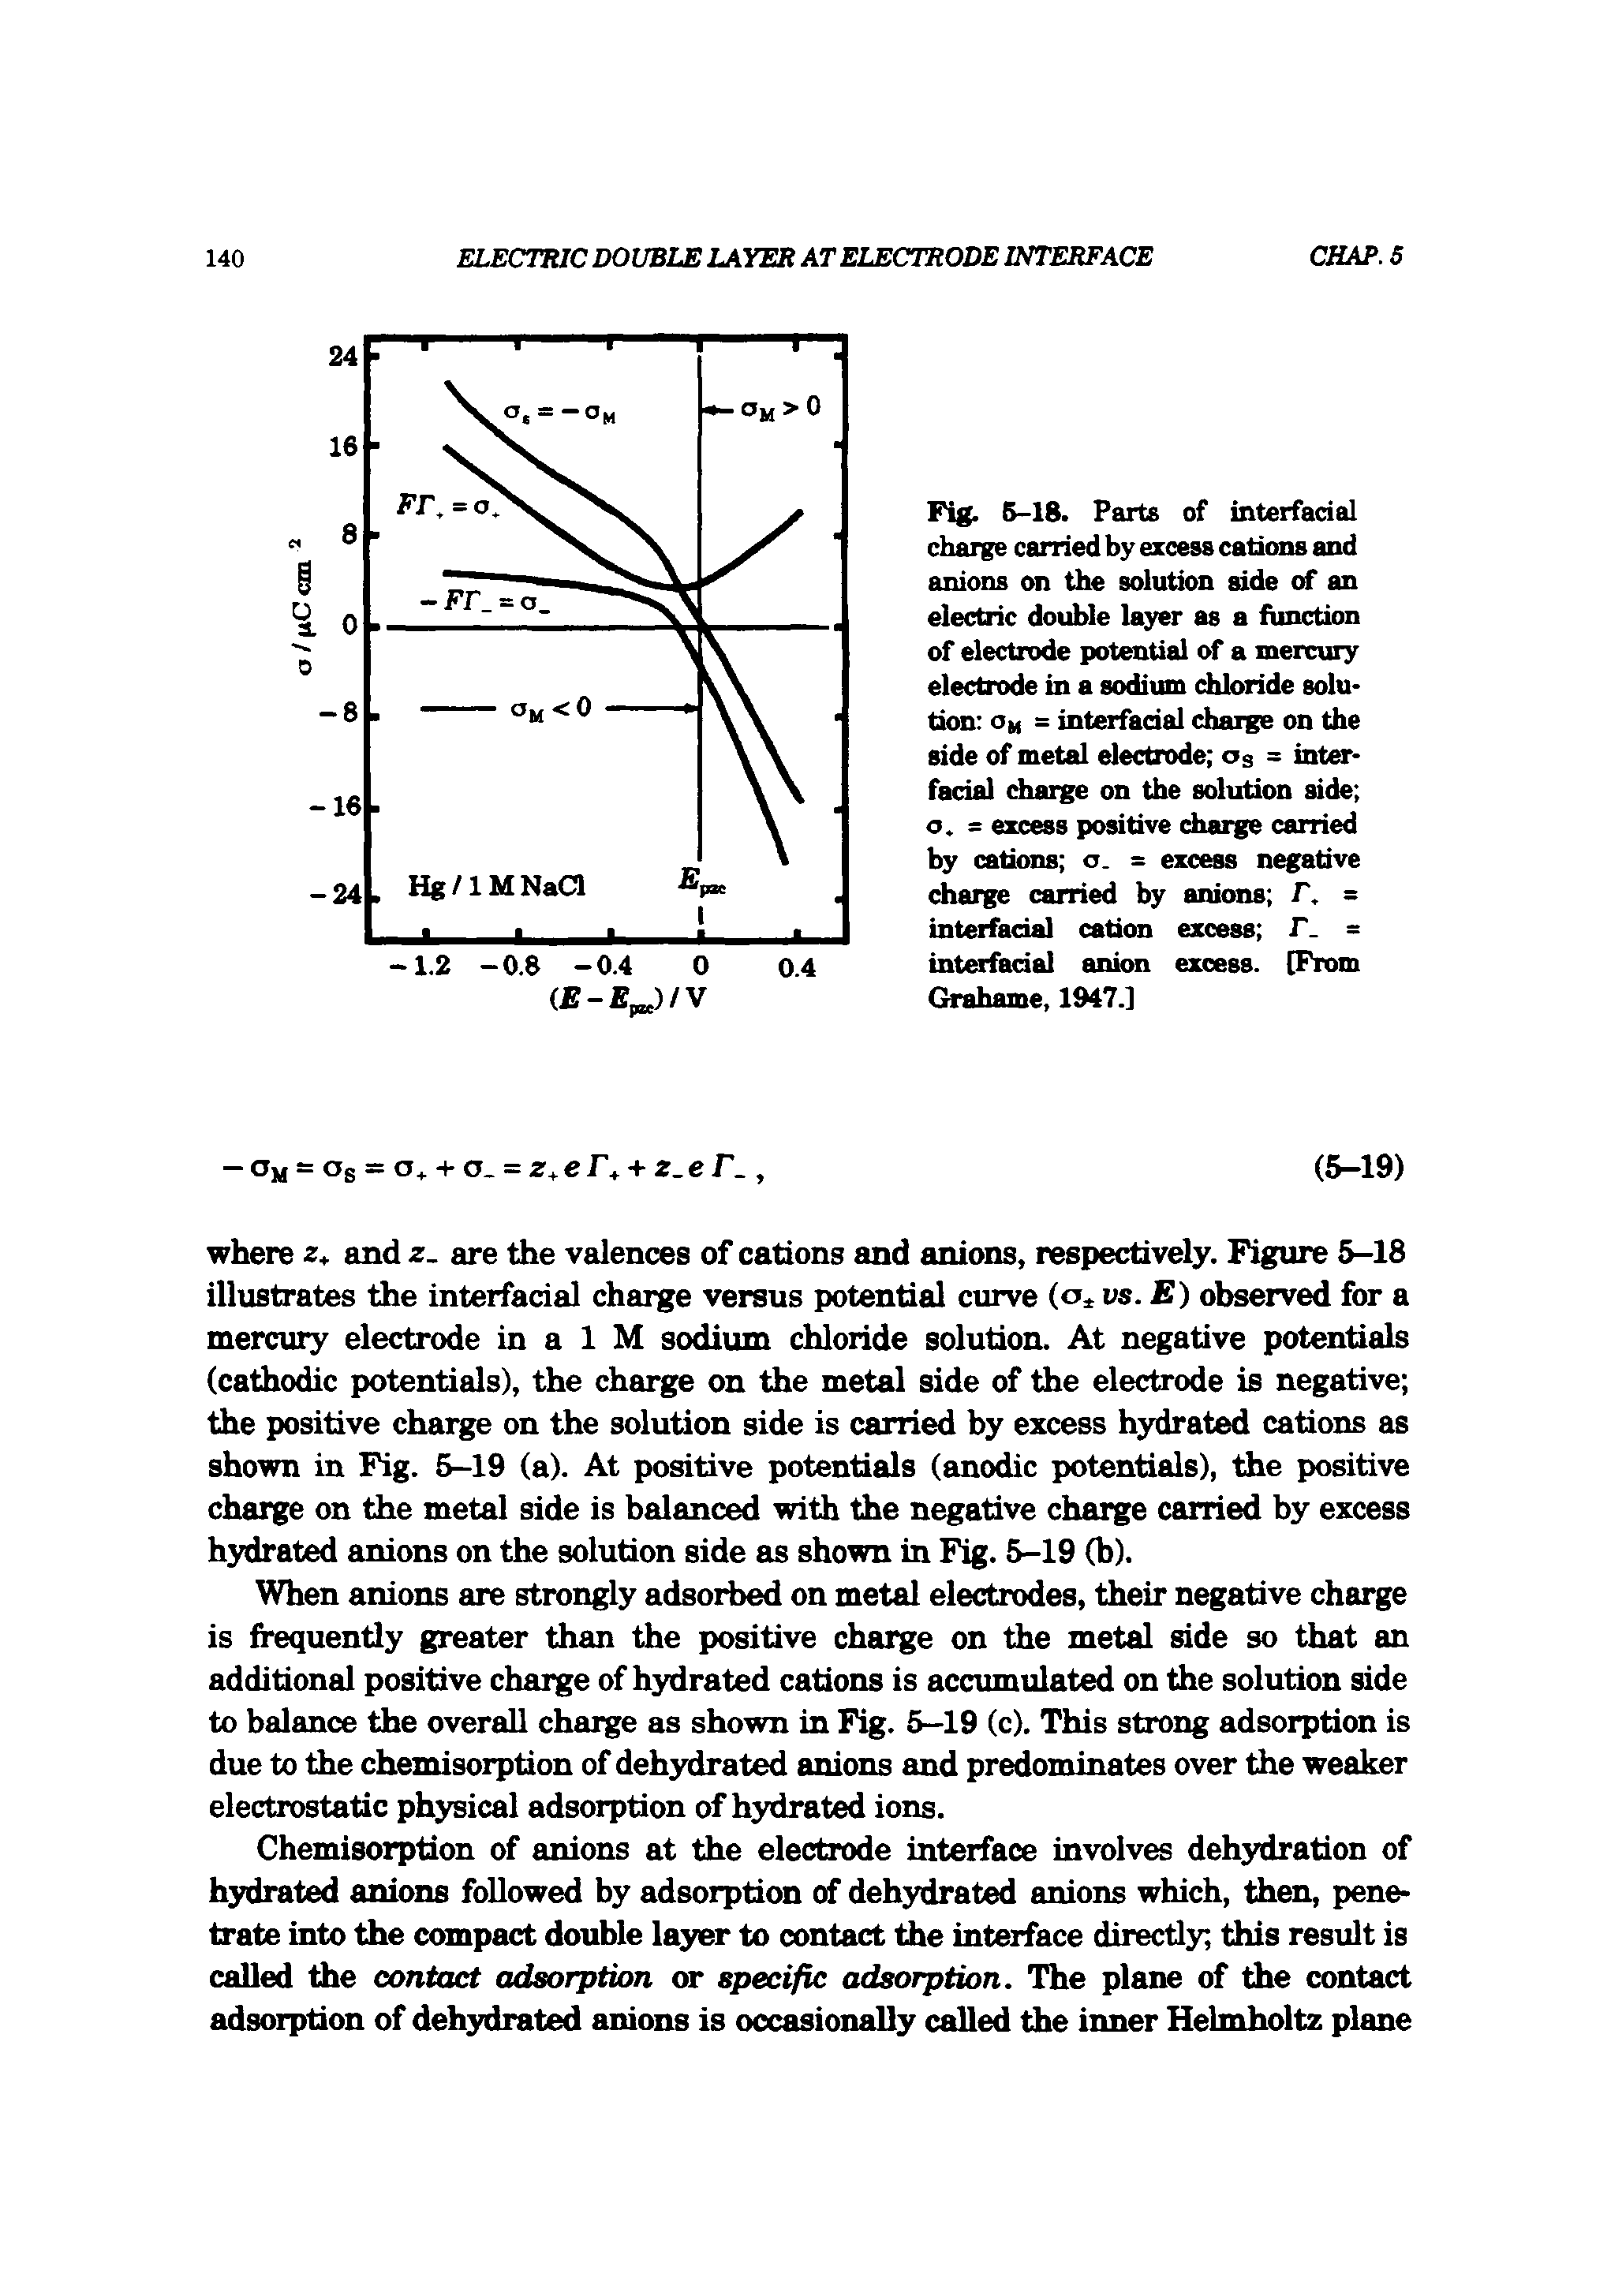 Fig. 5-18. Parts of interfacial charge carried by excess cations and anions on the solution side of an electric double layer as a function of electrode potential of a mercury electrode in a sodium chloride solution Oh = interfacial charge on the side of metal electrode os = interfacial charge on the solution side o. = excess positive chaige carried by cations o. = excess negative charge carried by anions r. = interfacial cation excess T. = interfacial anion excess. [From ( ahame, 1947.]...